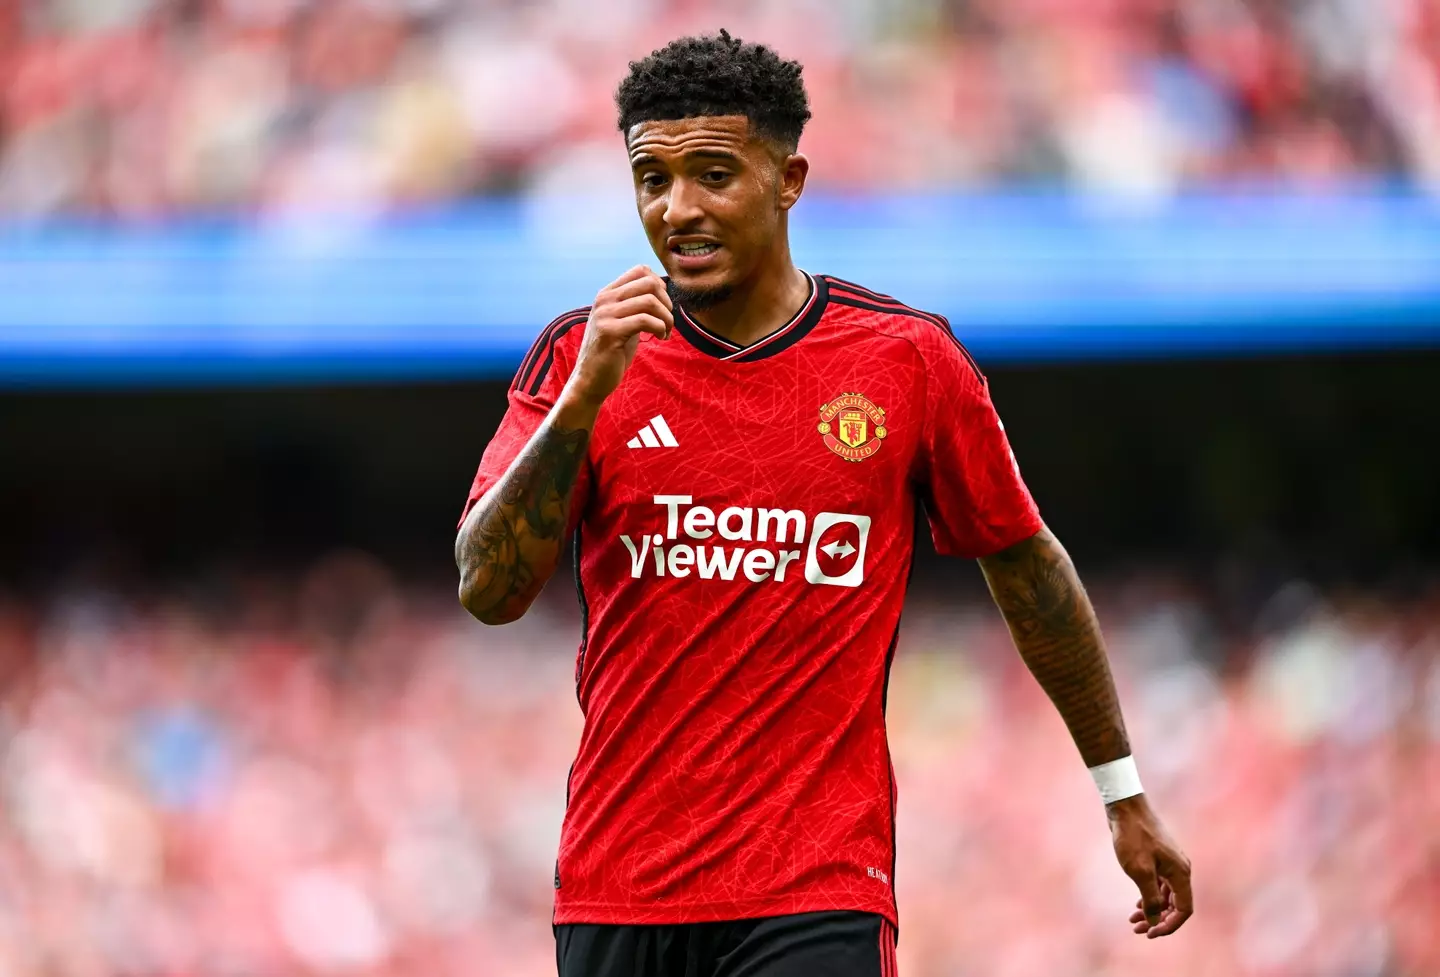 Sancho's United career looks to be over. (Image